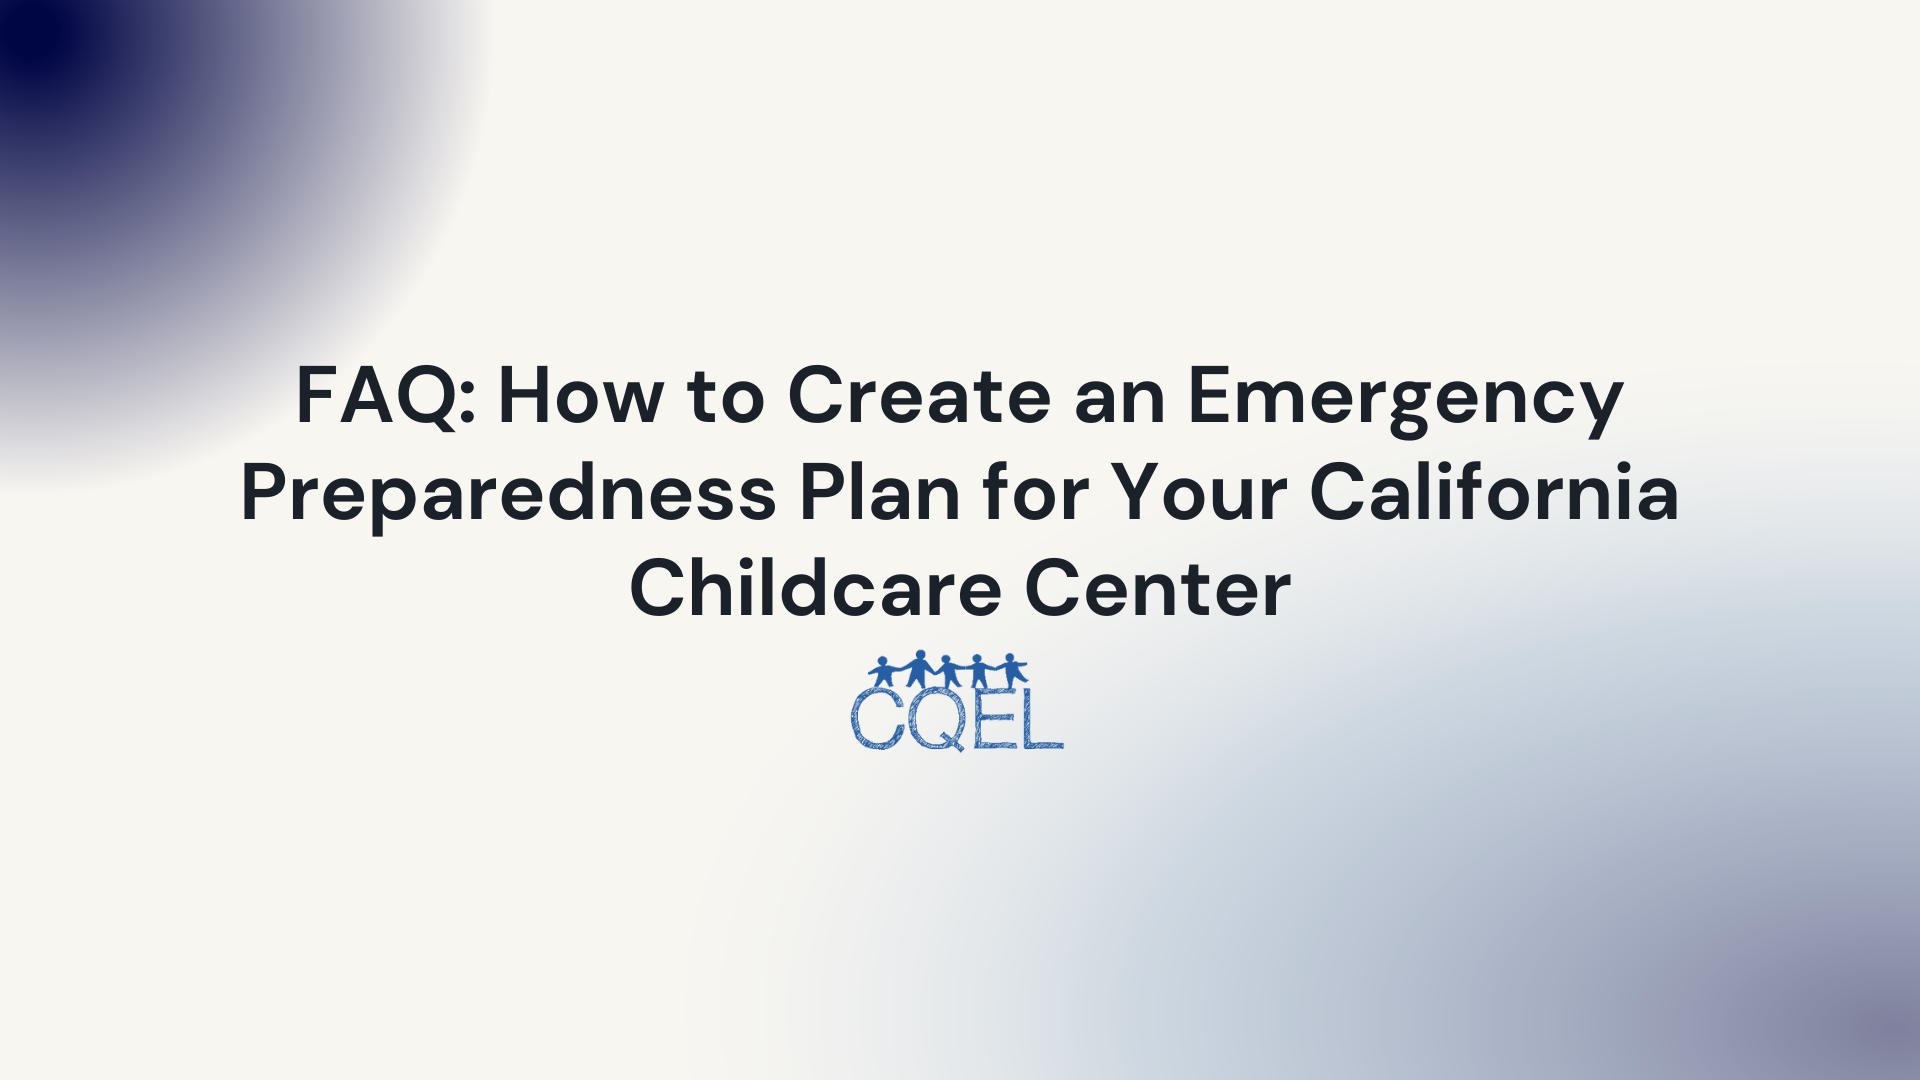 FAQ: How to Create an Emergency Preparedness Plan for Your California Childcare Center